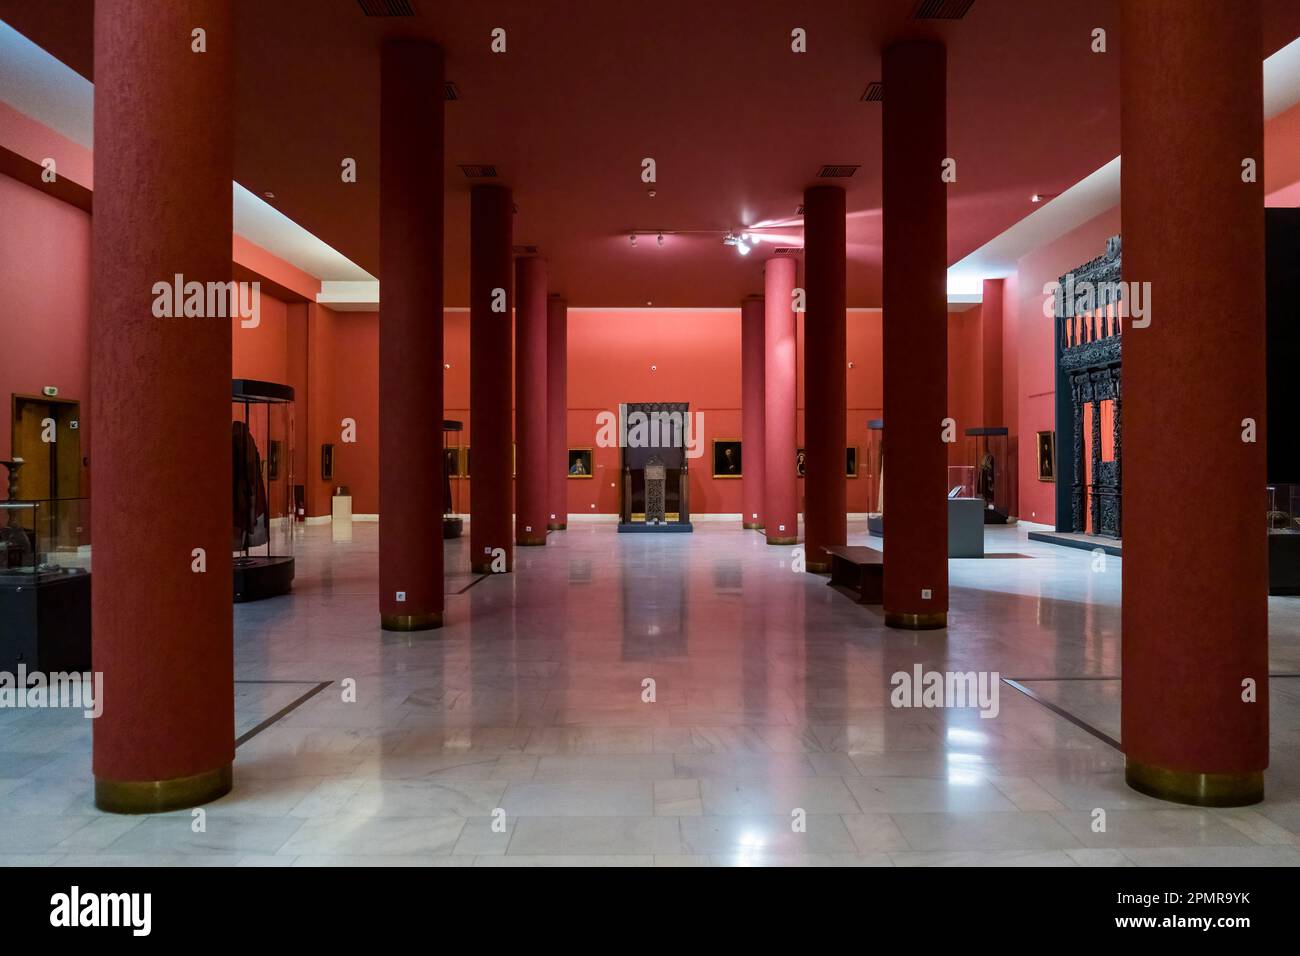 Interior of the National Museum Art Bucharest located in the former Royal Palace of Bucharest, Romania. Gallery of Romanian art. Stock Photo